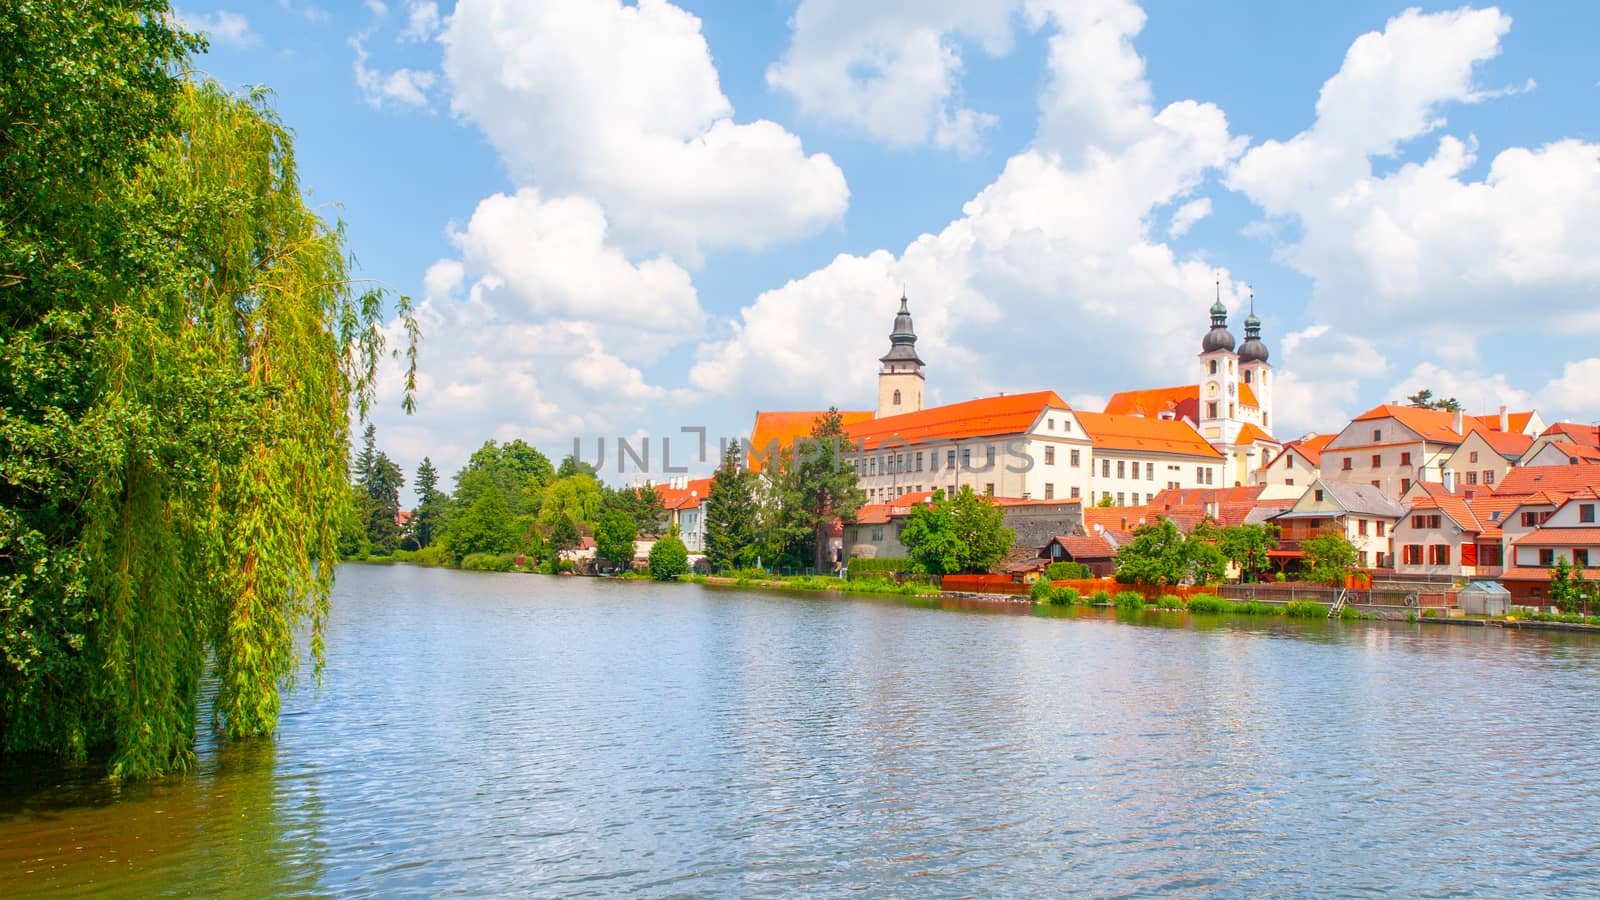 Telc Panorama. Water reflection of houses and Telc Castle, Czech Republic. UNESCO World Heritage Site by pyty